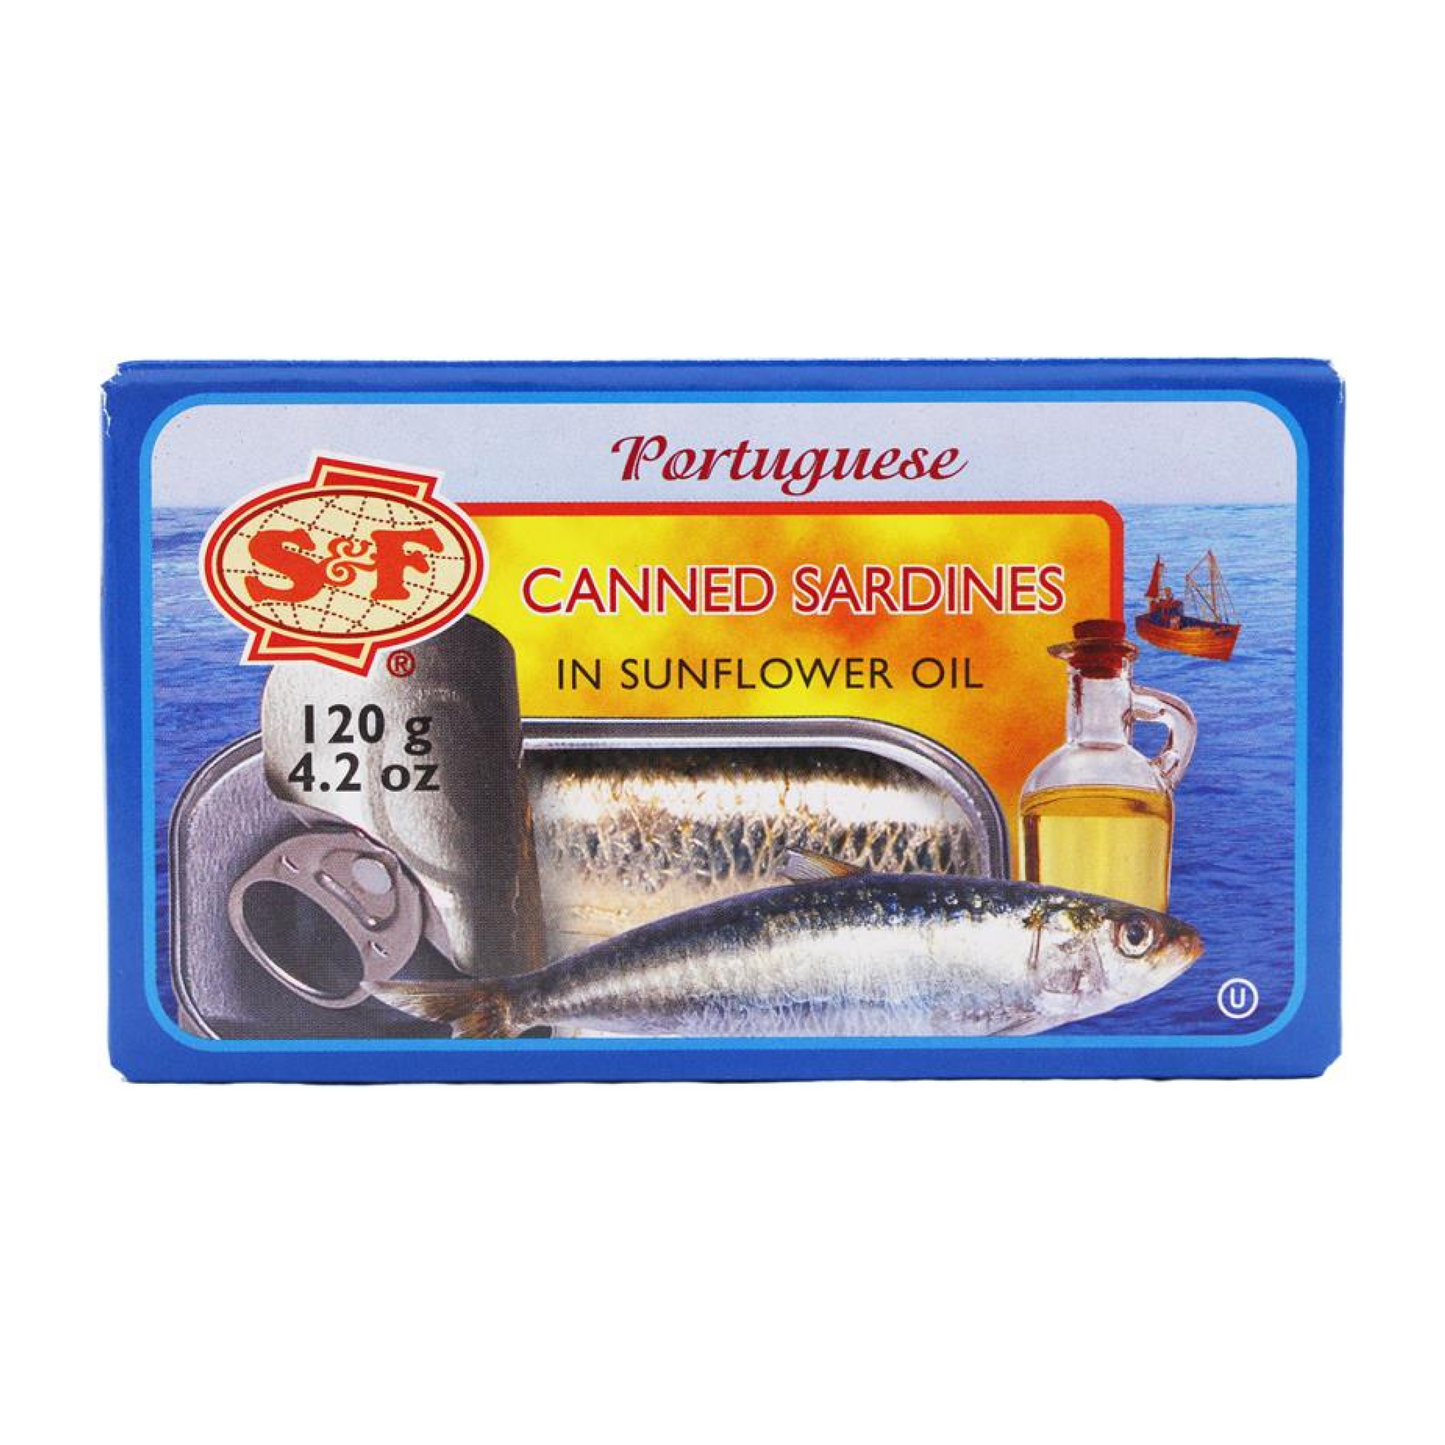 S&F Portuguese Canned Sardines in Sunflower Oil 120g